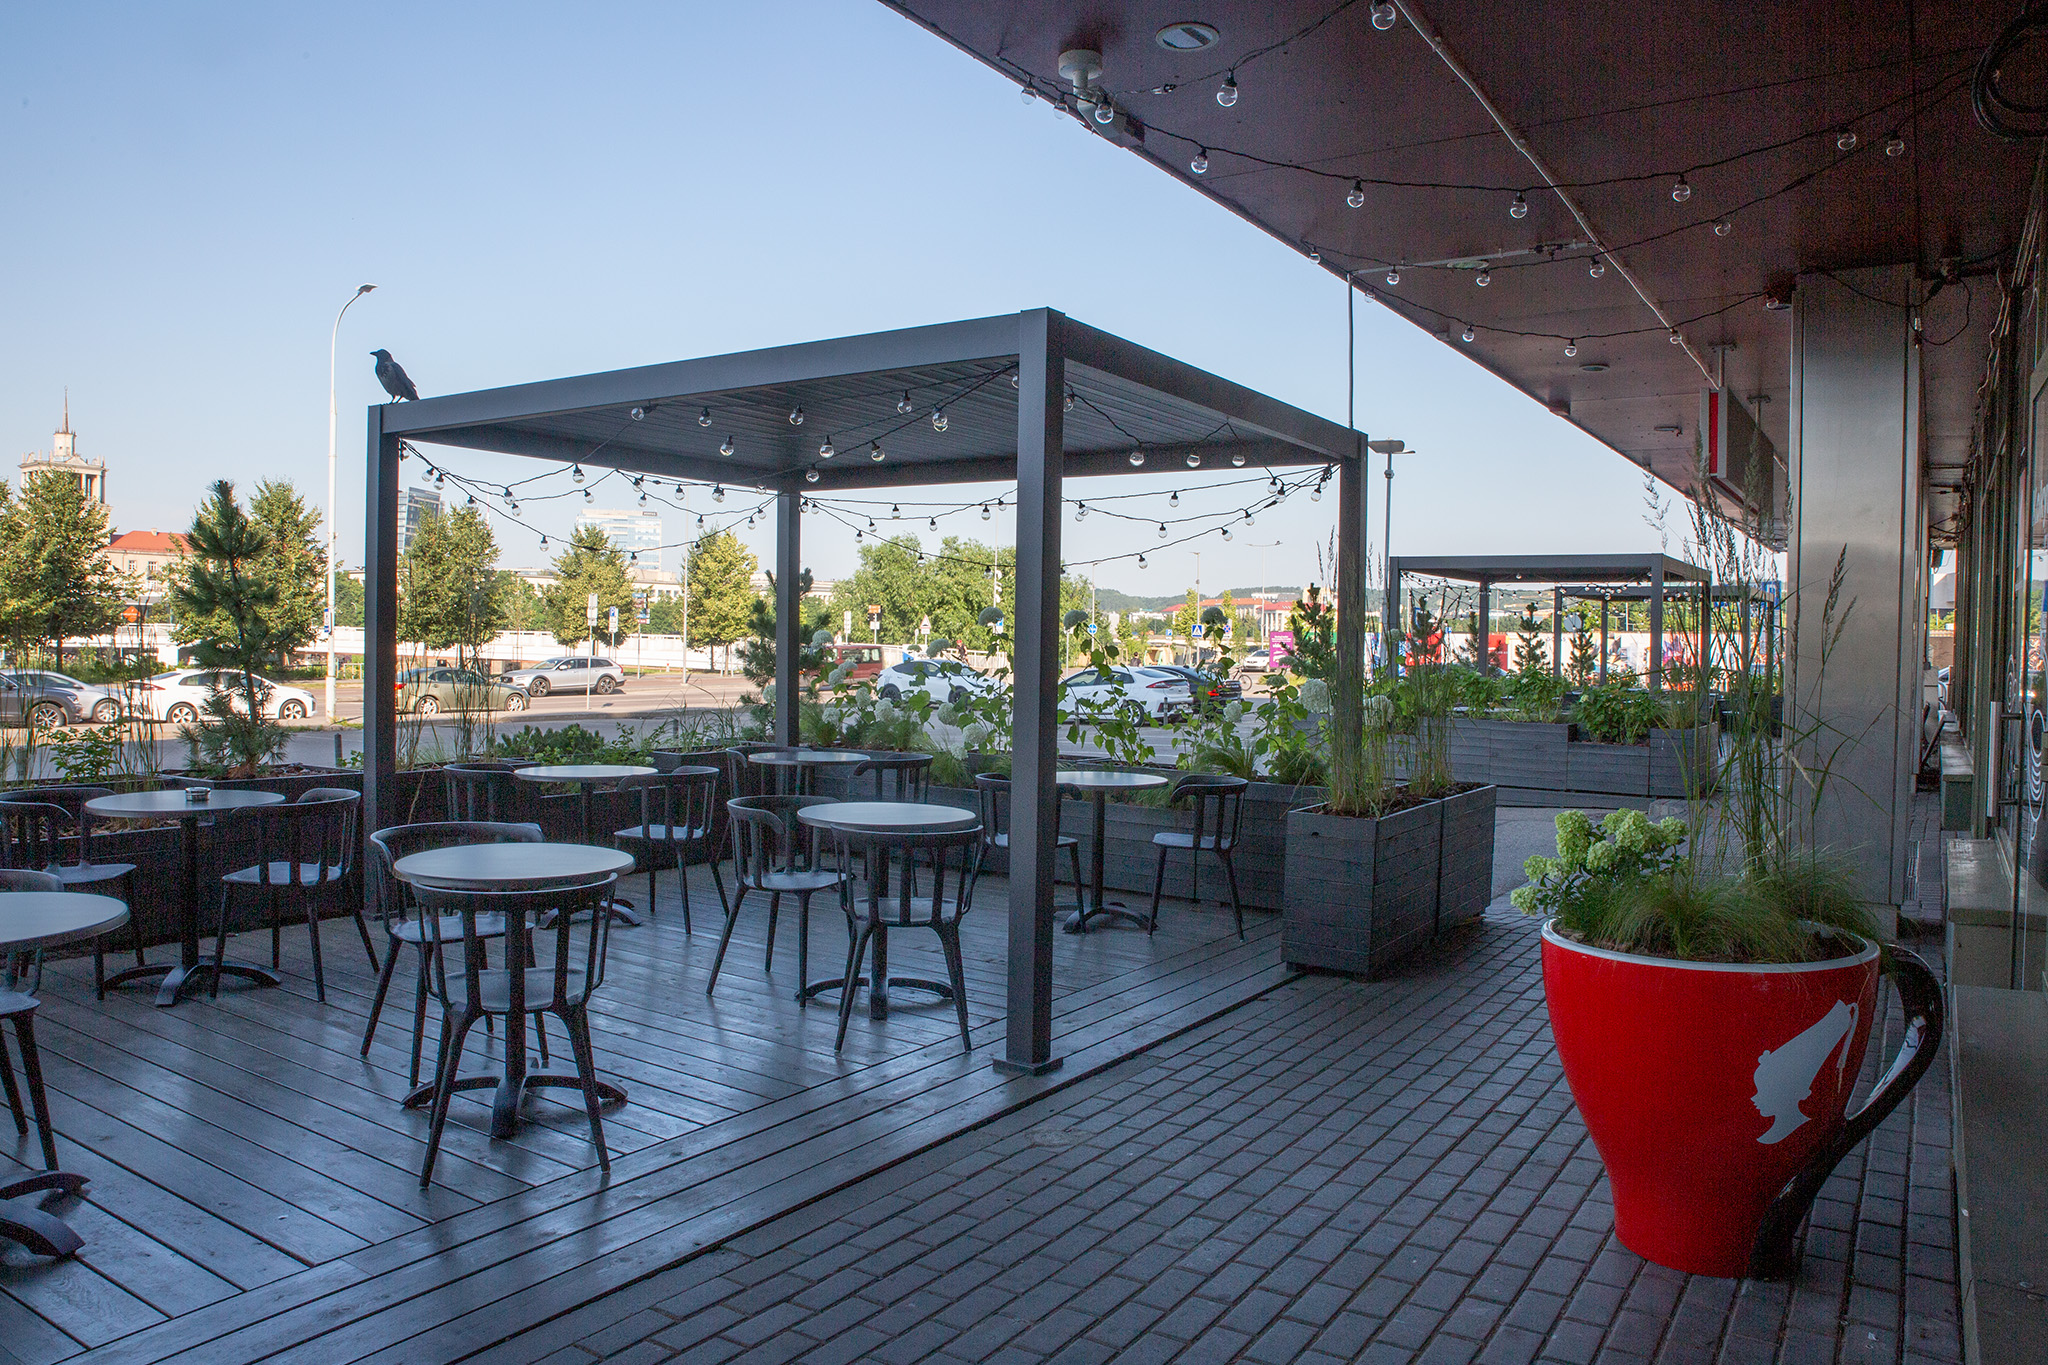 Turnover growth season for cafes and restaurants with outdoor terraces